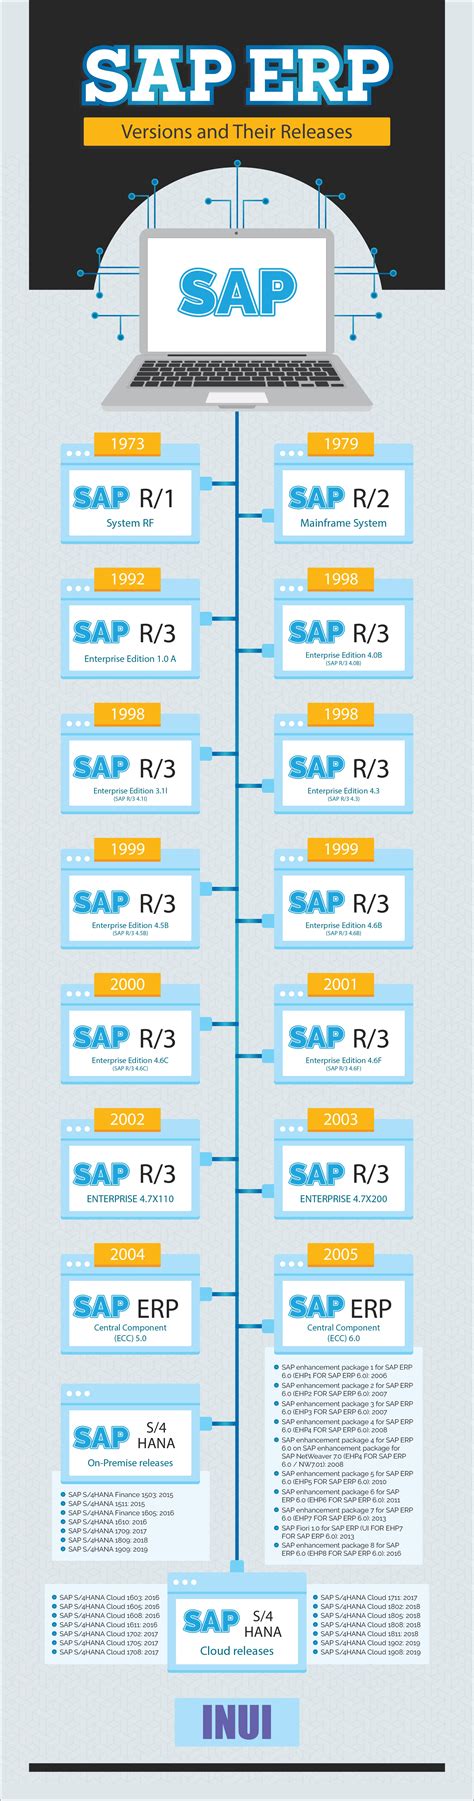 13 Basic Sap Terms Explained The Sap Full Forms Inui